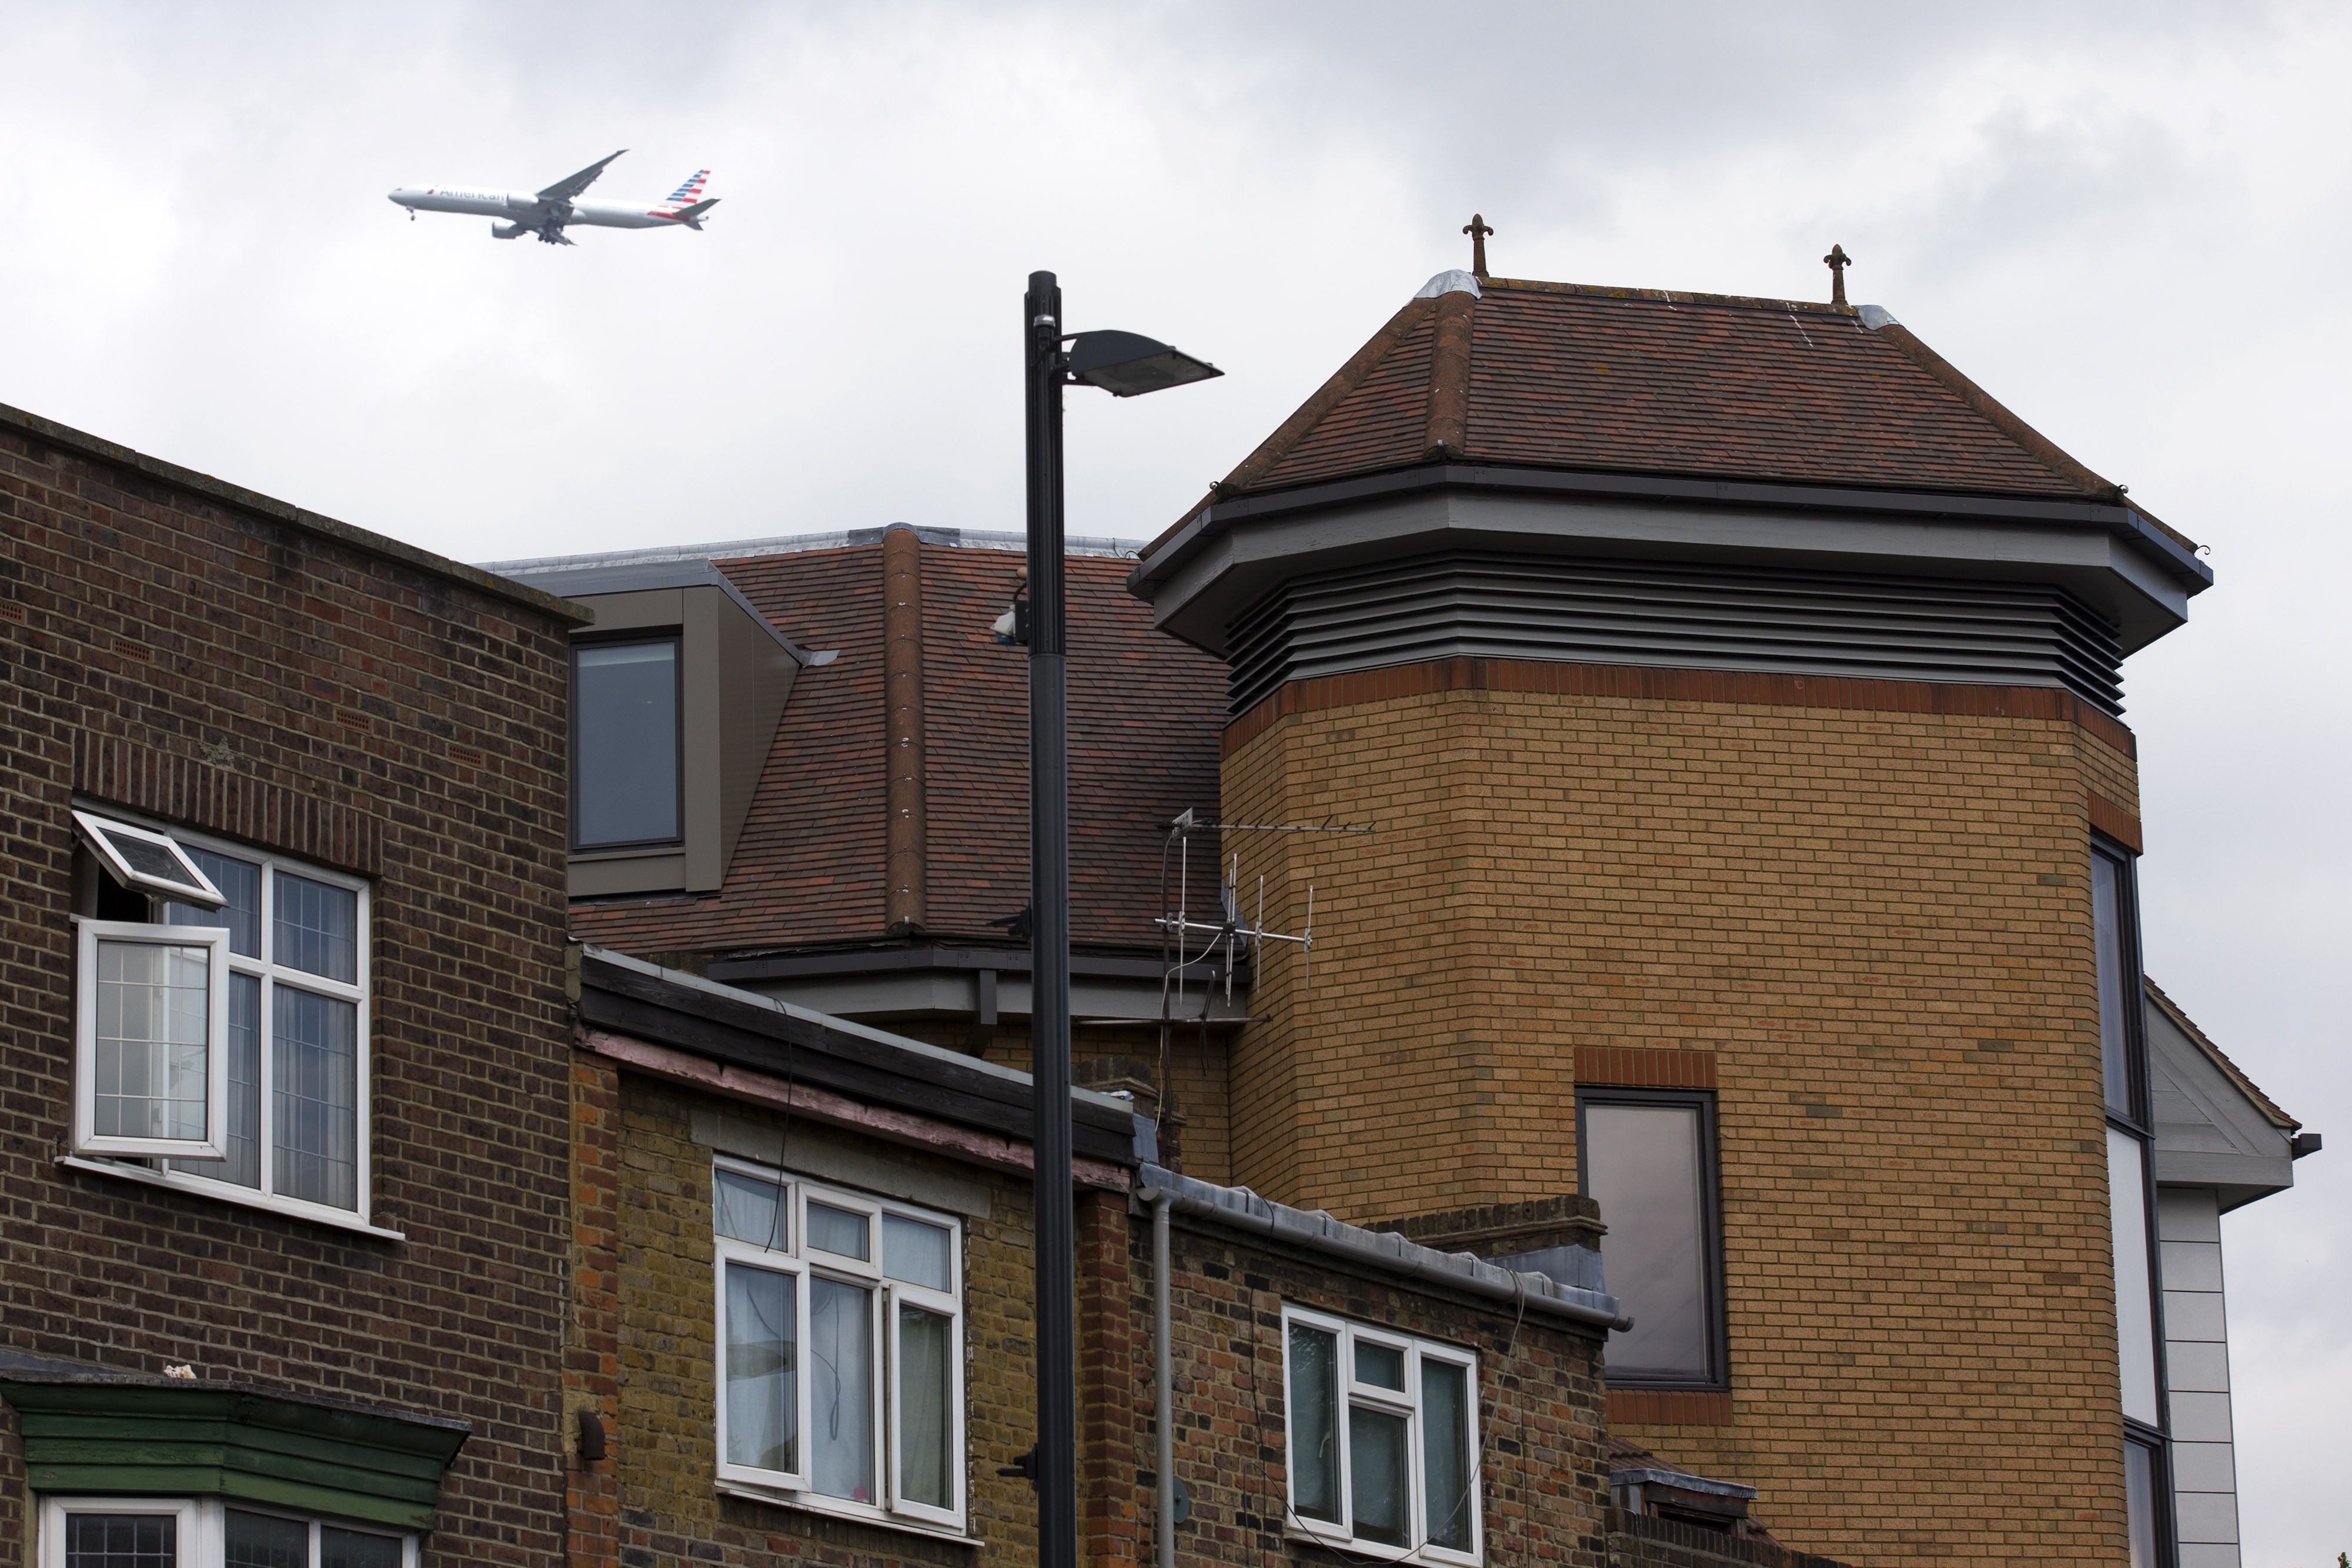 A airplane flies on June 19, 2015 past the offices of notonthehighstreet.com, an online retailer in Richmond, London where the body of a dead man was found on the roof on June 18.